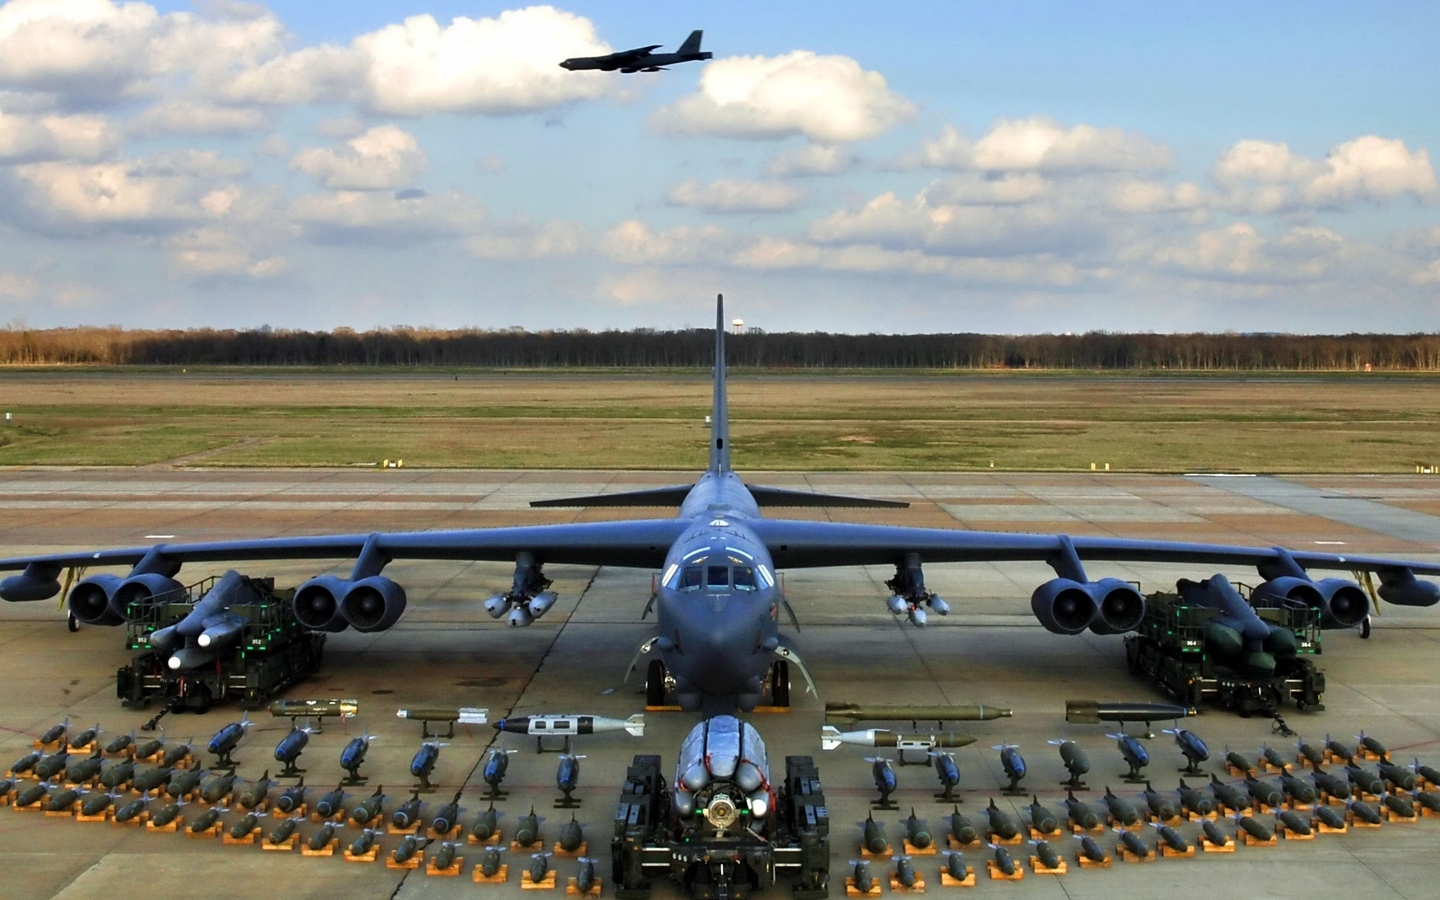 Image: Boeing, Boeing B-52, aircraft, airplane, bomber, munitions, missiles